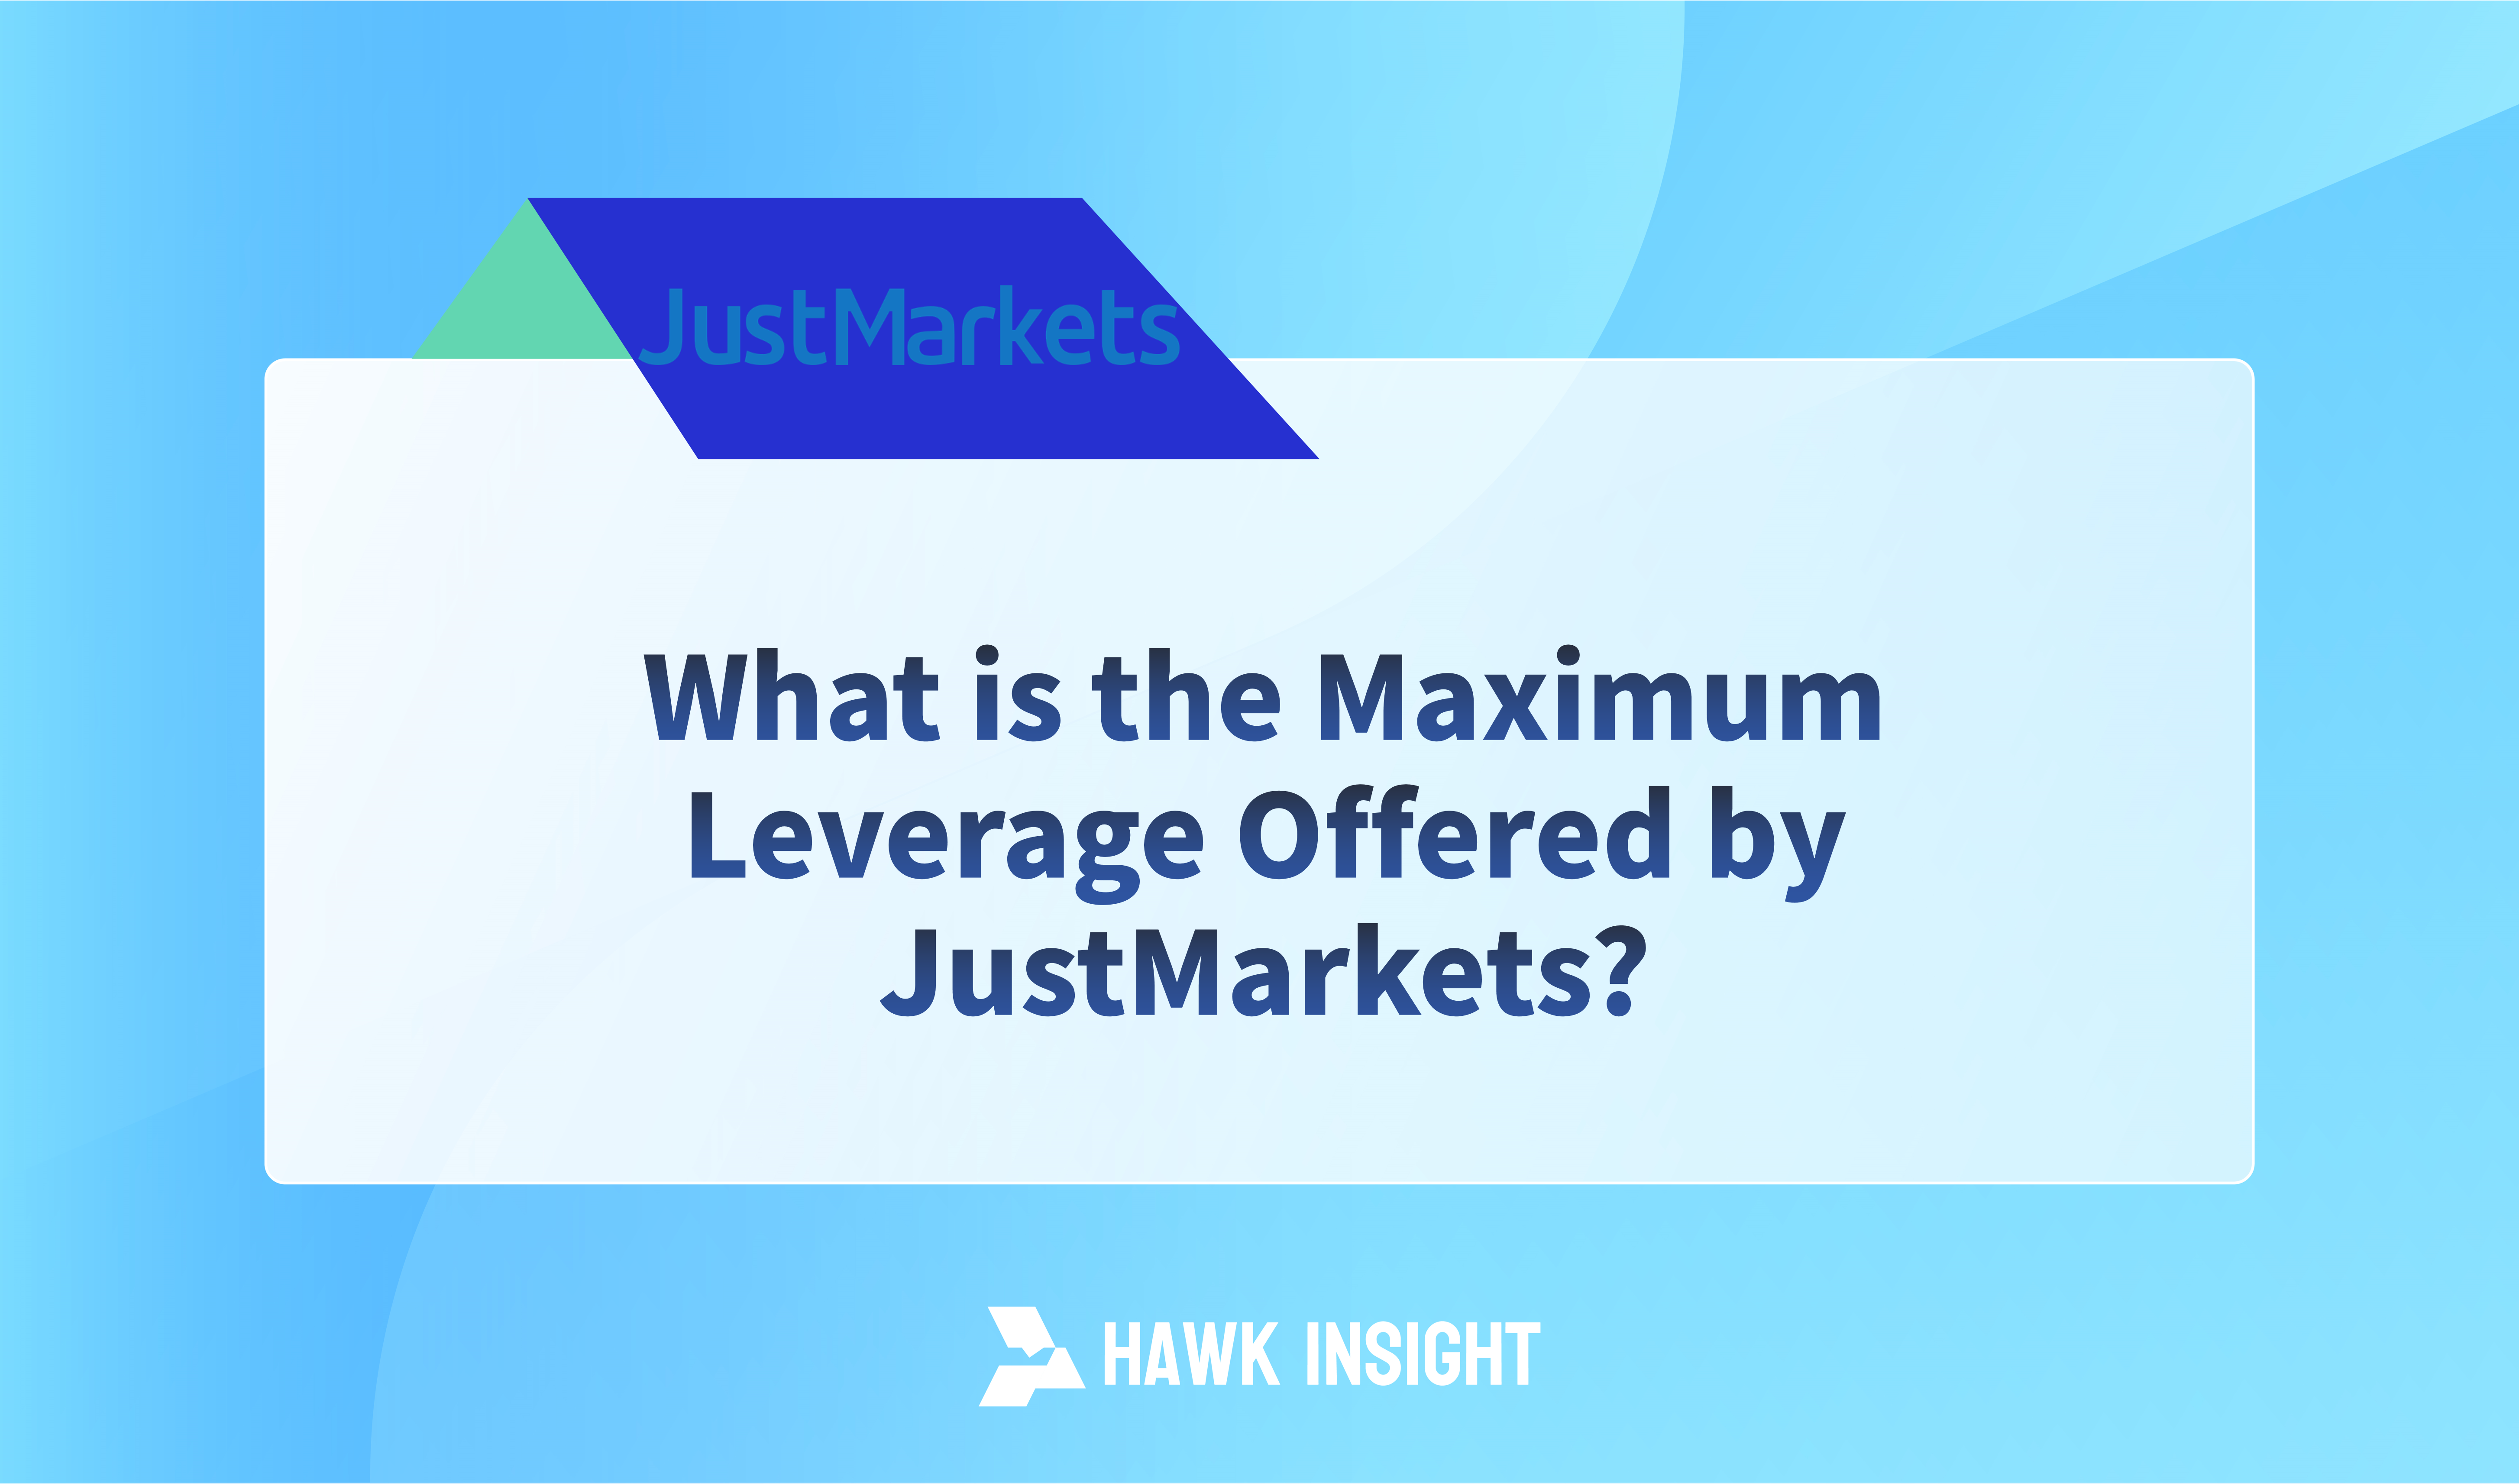 What is the Maximum Leverage Offered by JustMarkets?